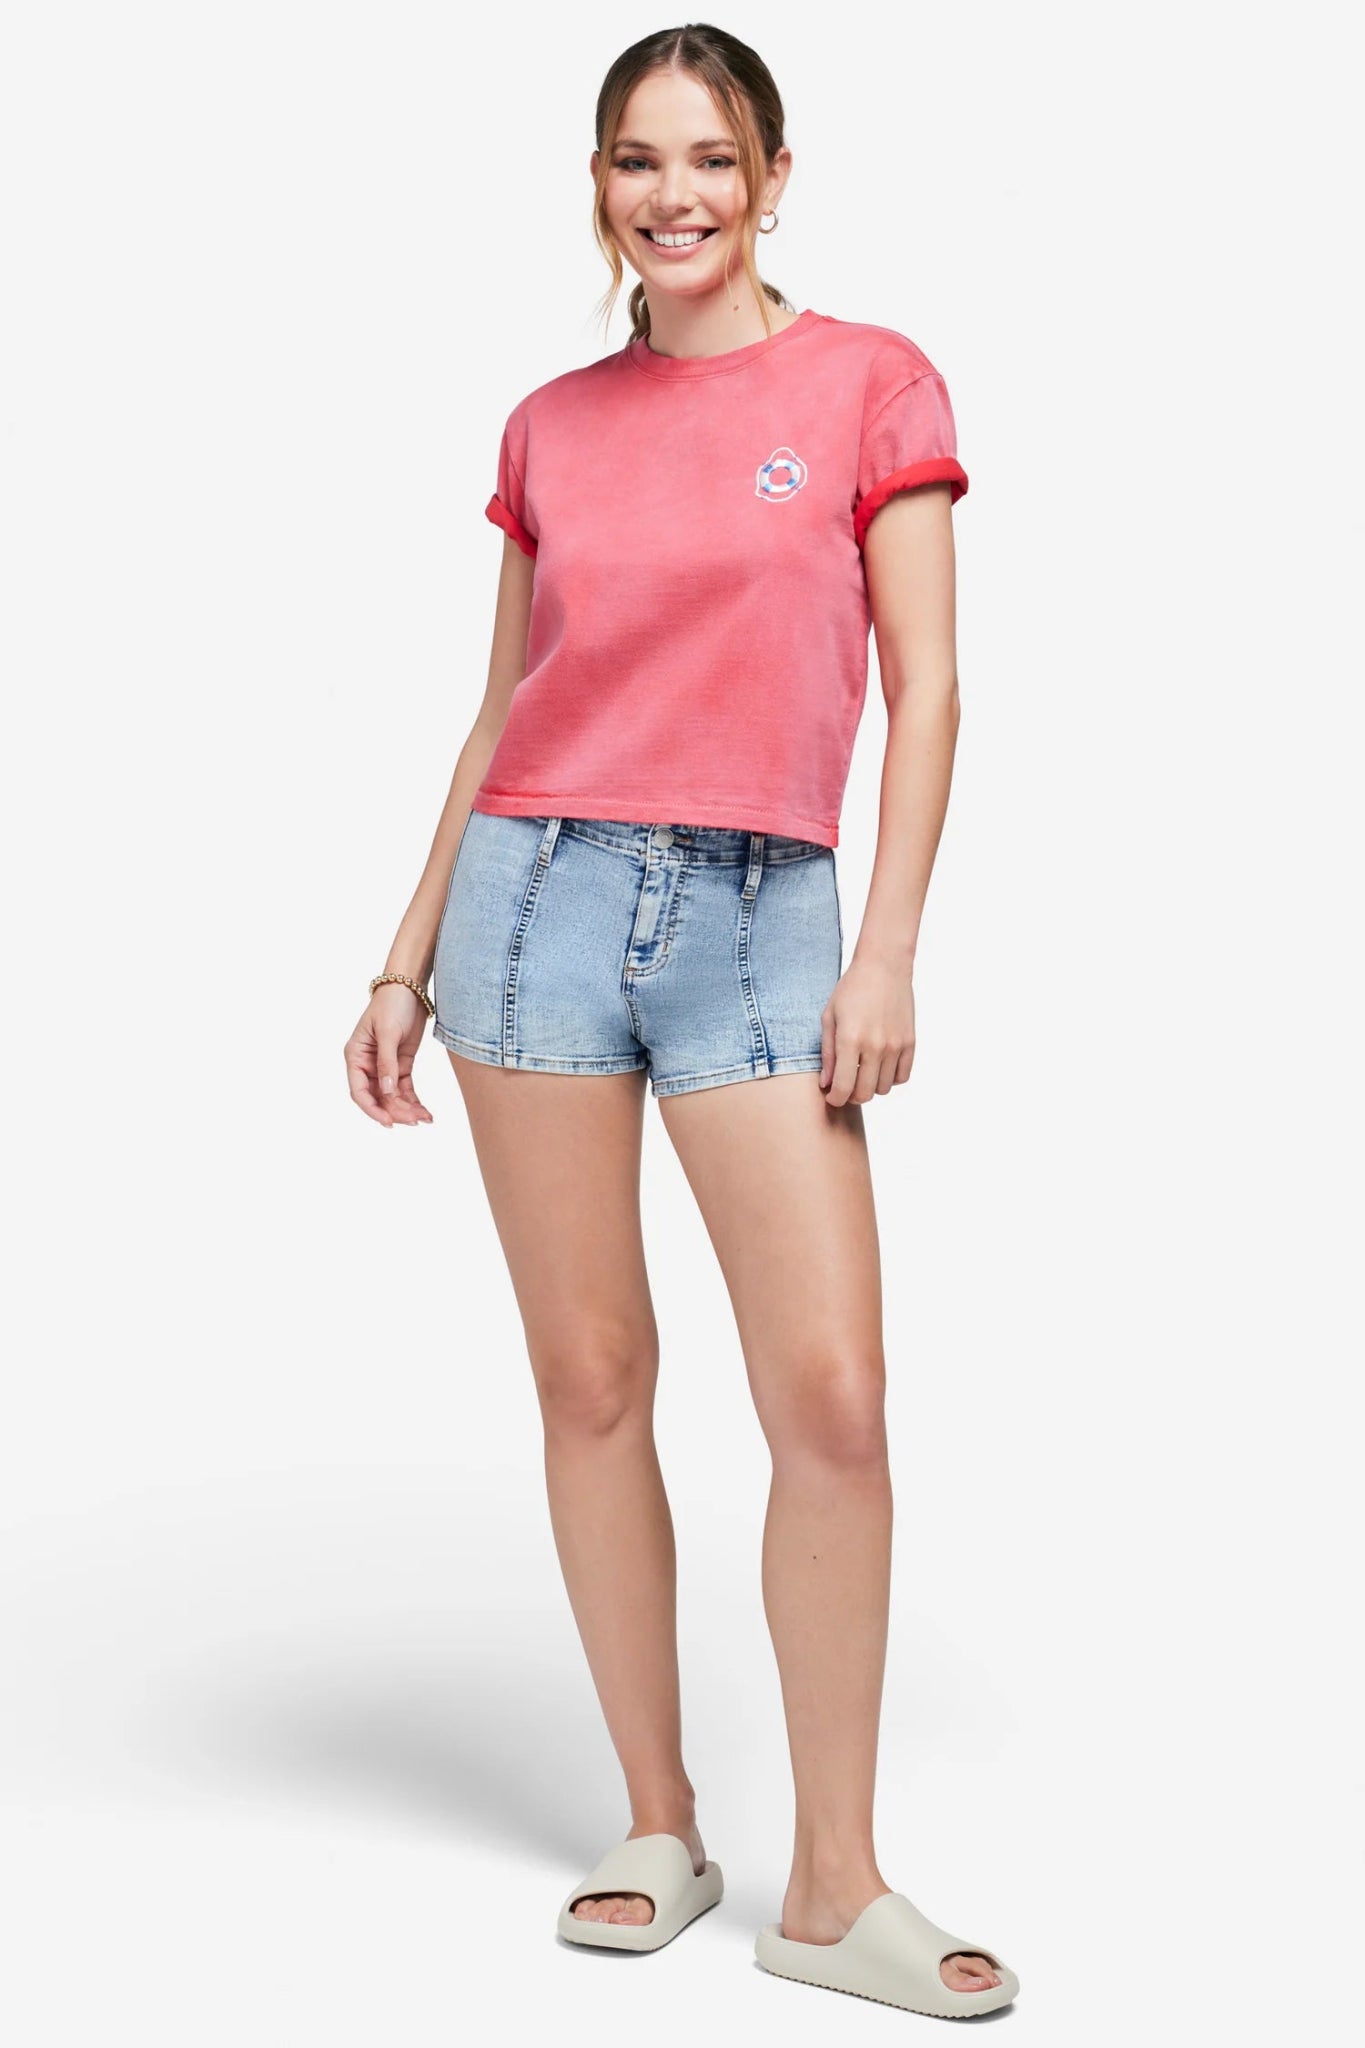 Shop Wildfox Off Duty Jaime Crop Tee - Premium T-Shirt from Wildfox Online now at Spoiled Brat 